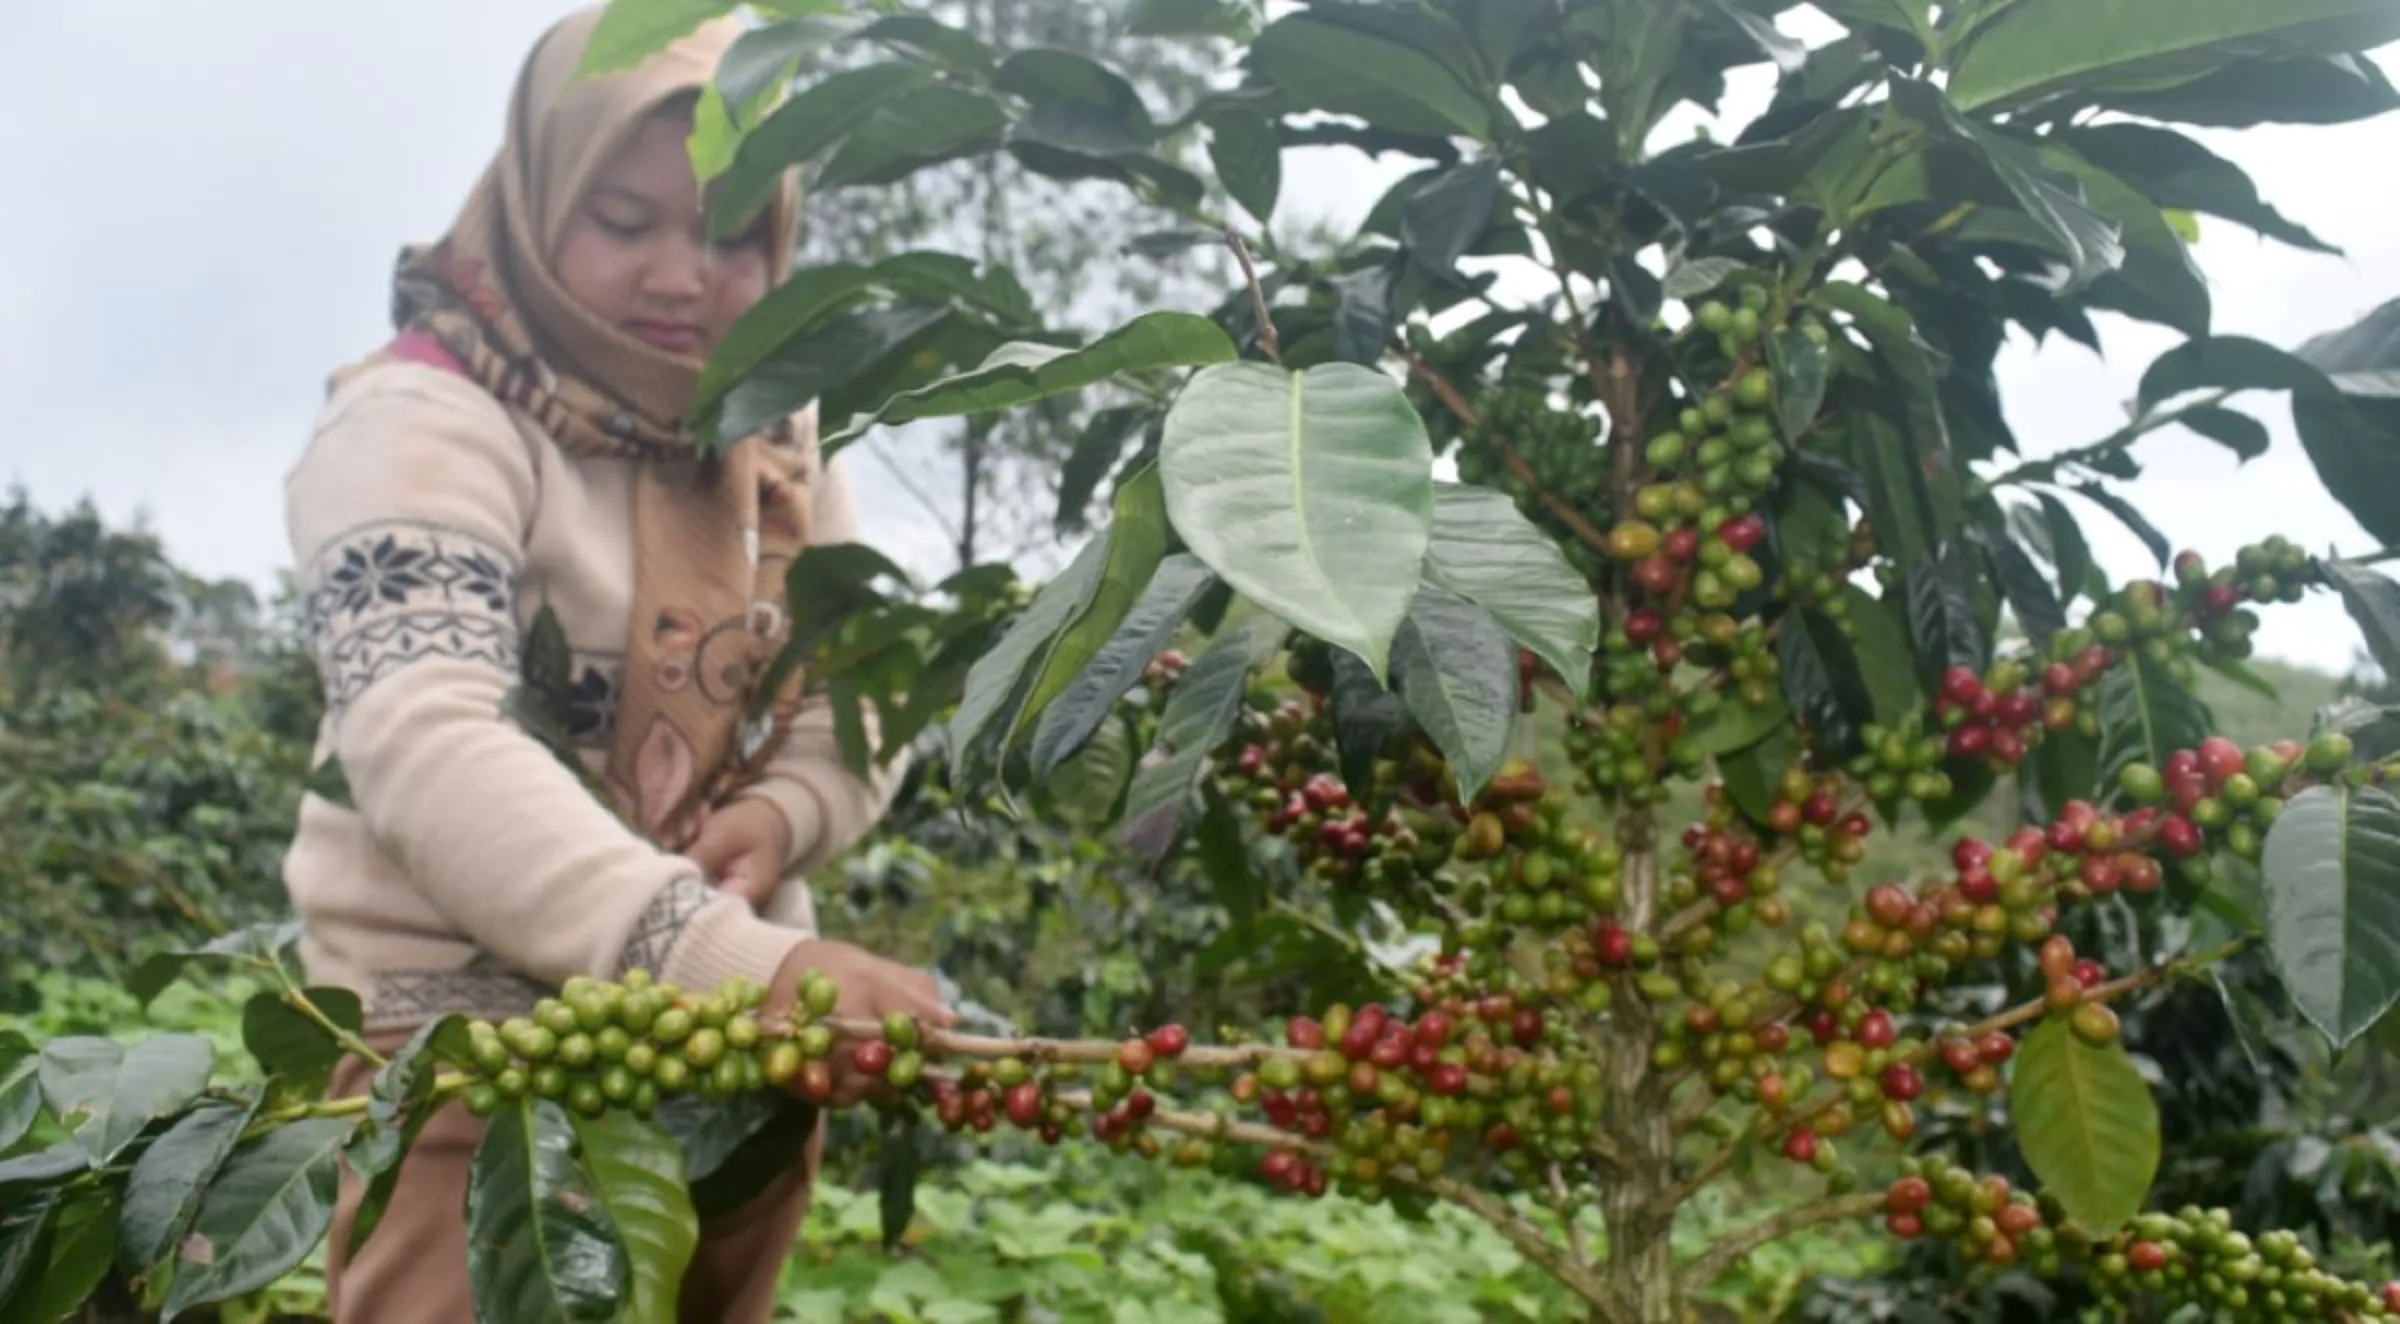 View of a coffee plant in the social forestry area of the Kamojang Block, Bukit Rakutak, Ibun Village, Bandung Regency, Indonesia, planted using an agroforestry system,  May 5 2023